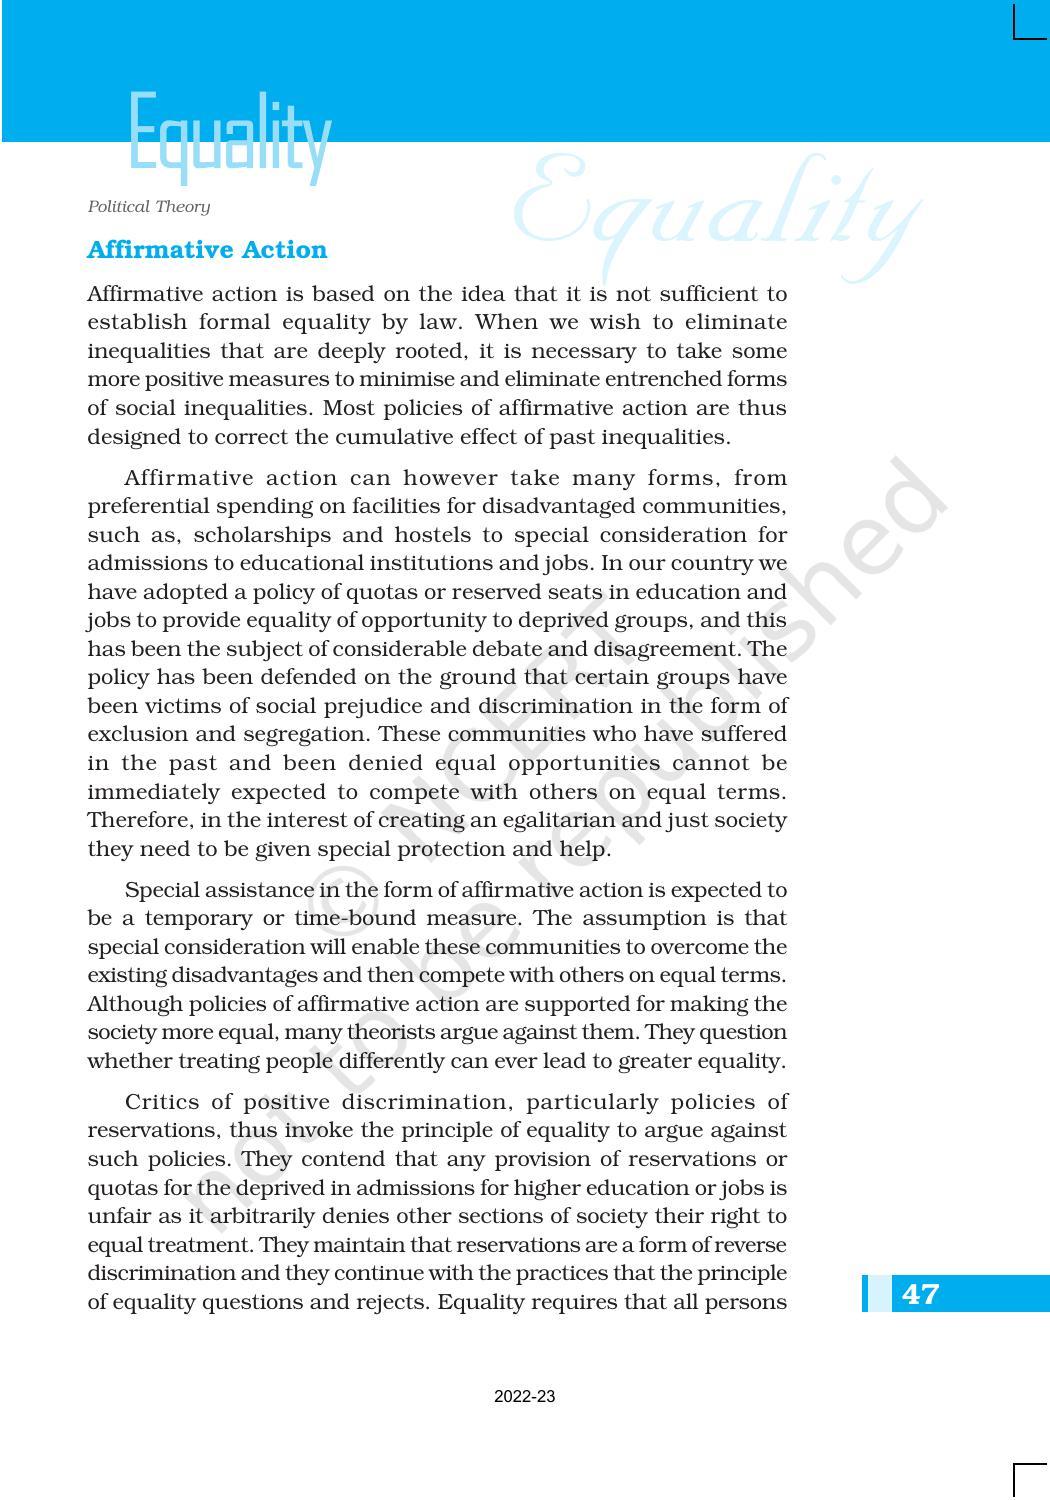 NCERT Book for Class 11 Political Science (Political Theory) Chapter 3 Equality - Page 17